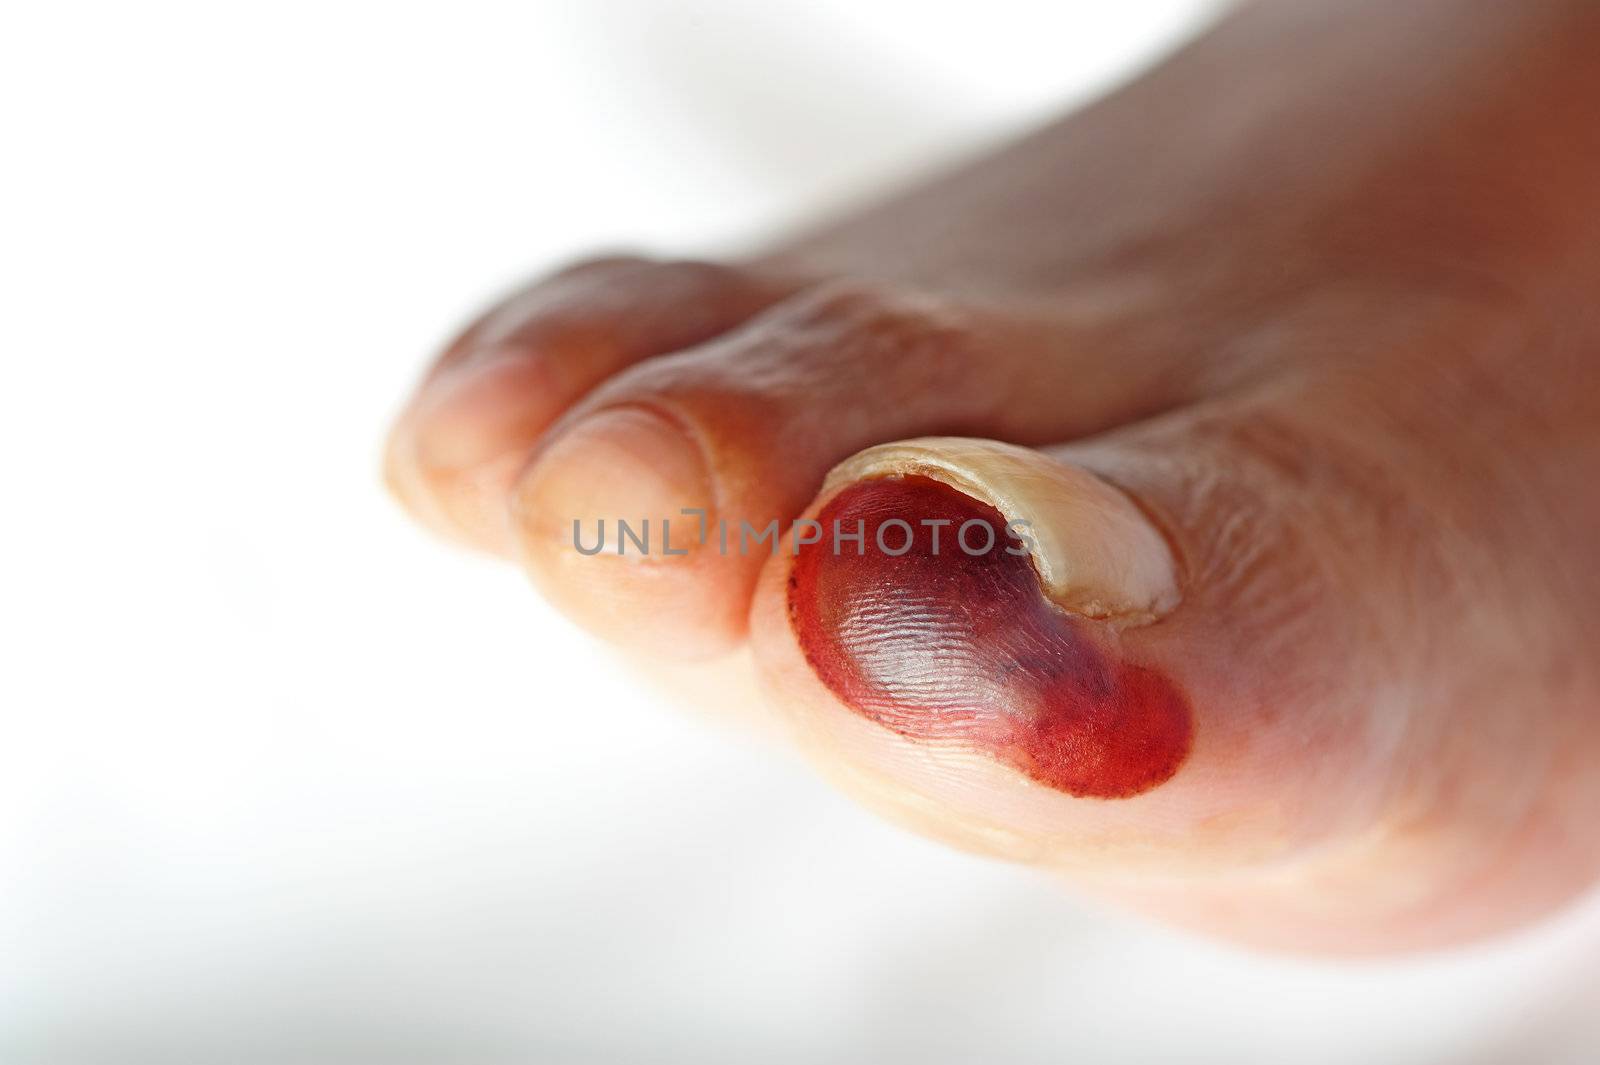 Dry gangrene is seen affecting the big toe of a diabetic patient.